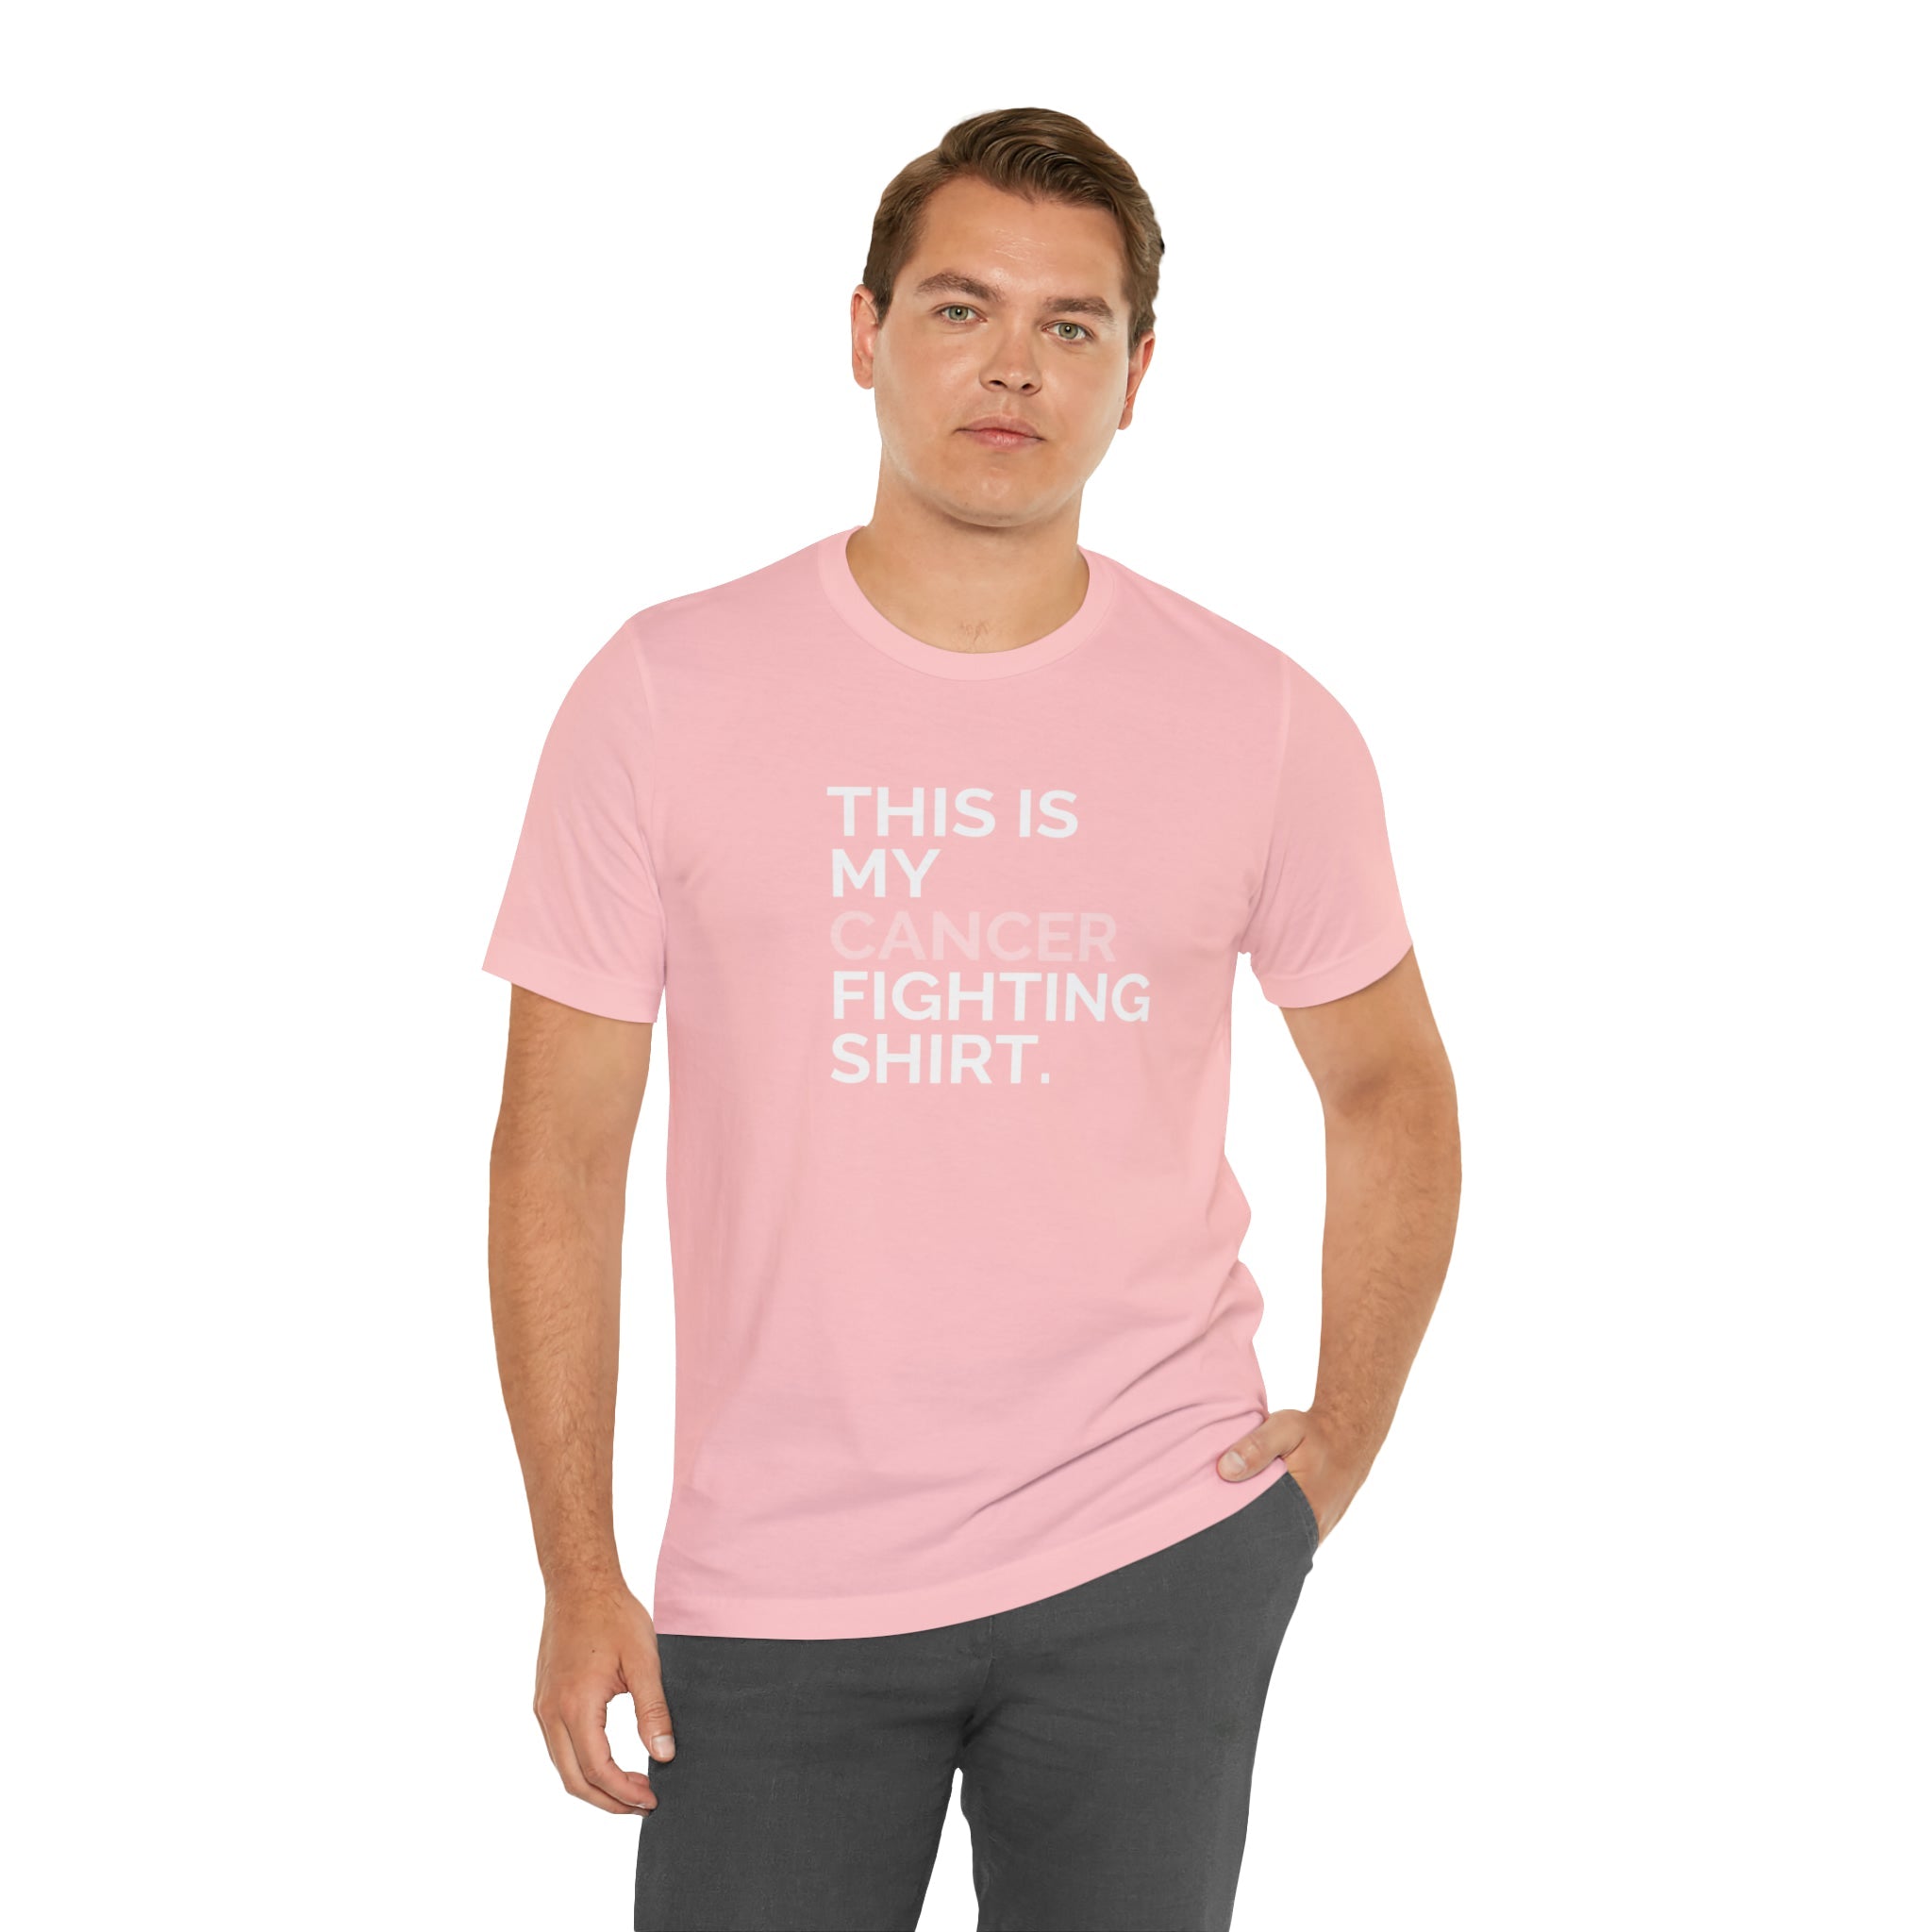 This is My Cancer Fighting Shirt Unisex Jersey Short Sleeve Tee - The Kindness Cause